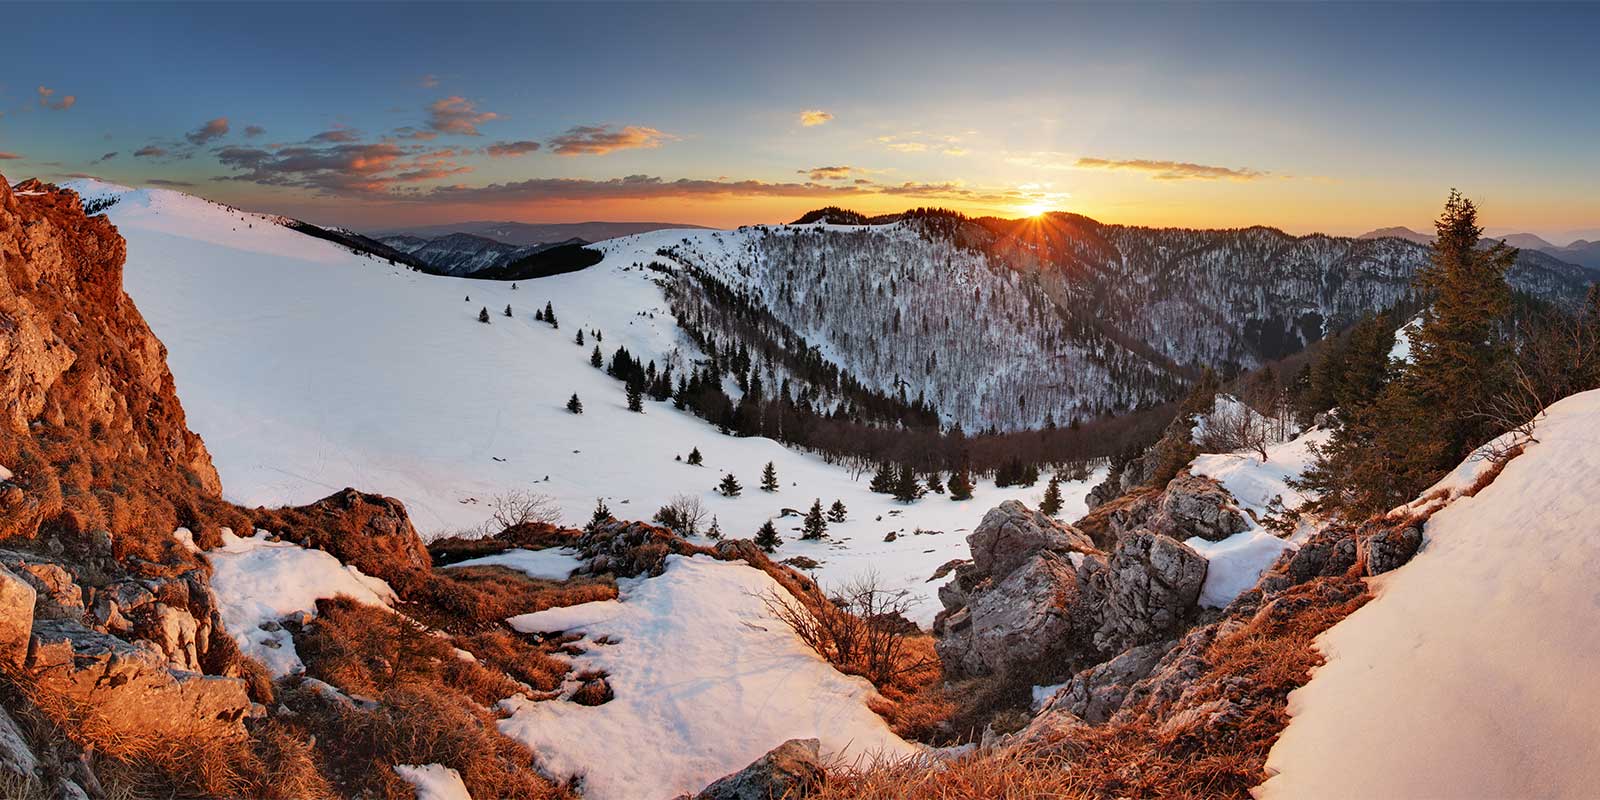 Velka Fatra Mountain during winter at sunset in Slovakia